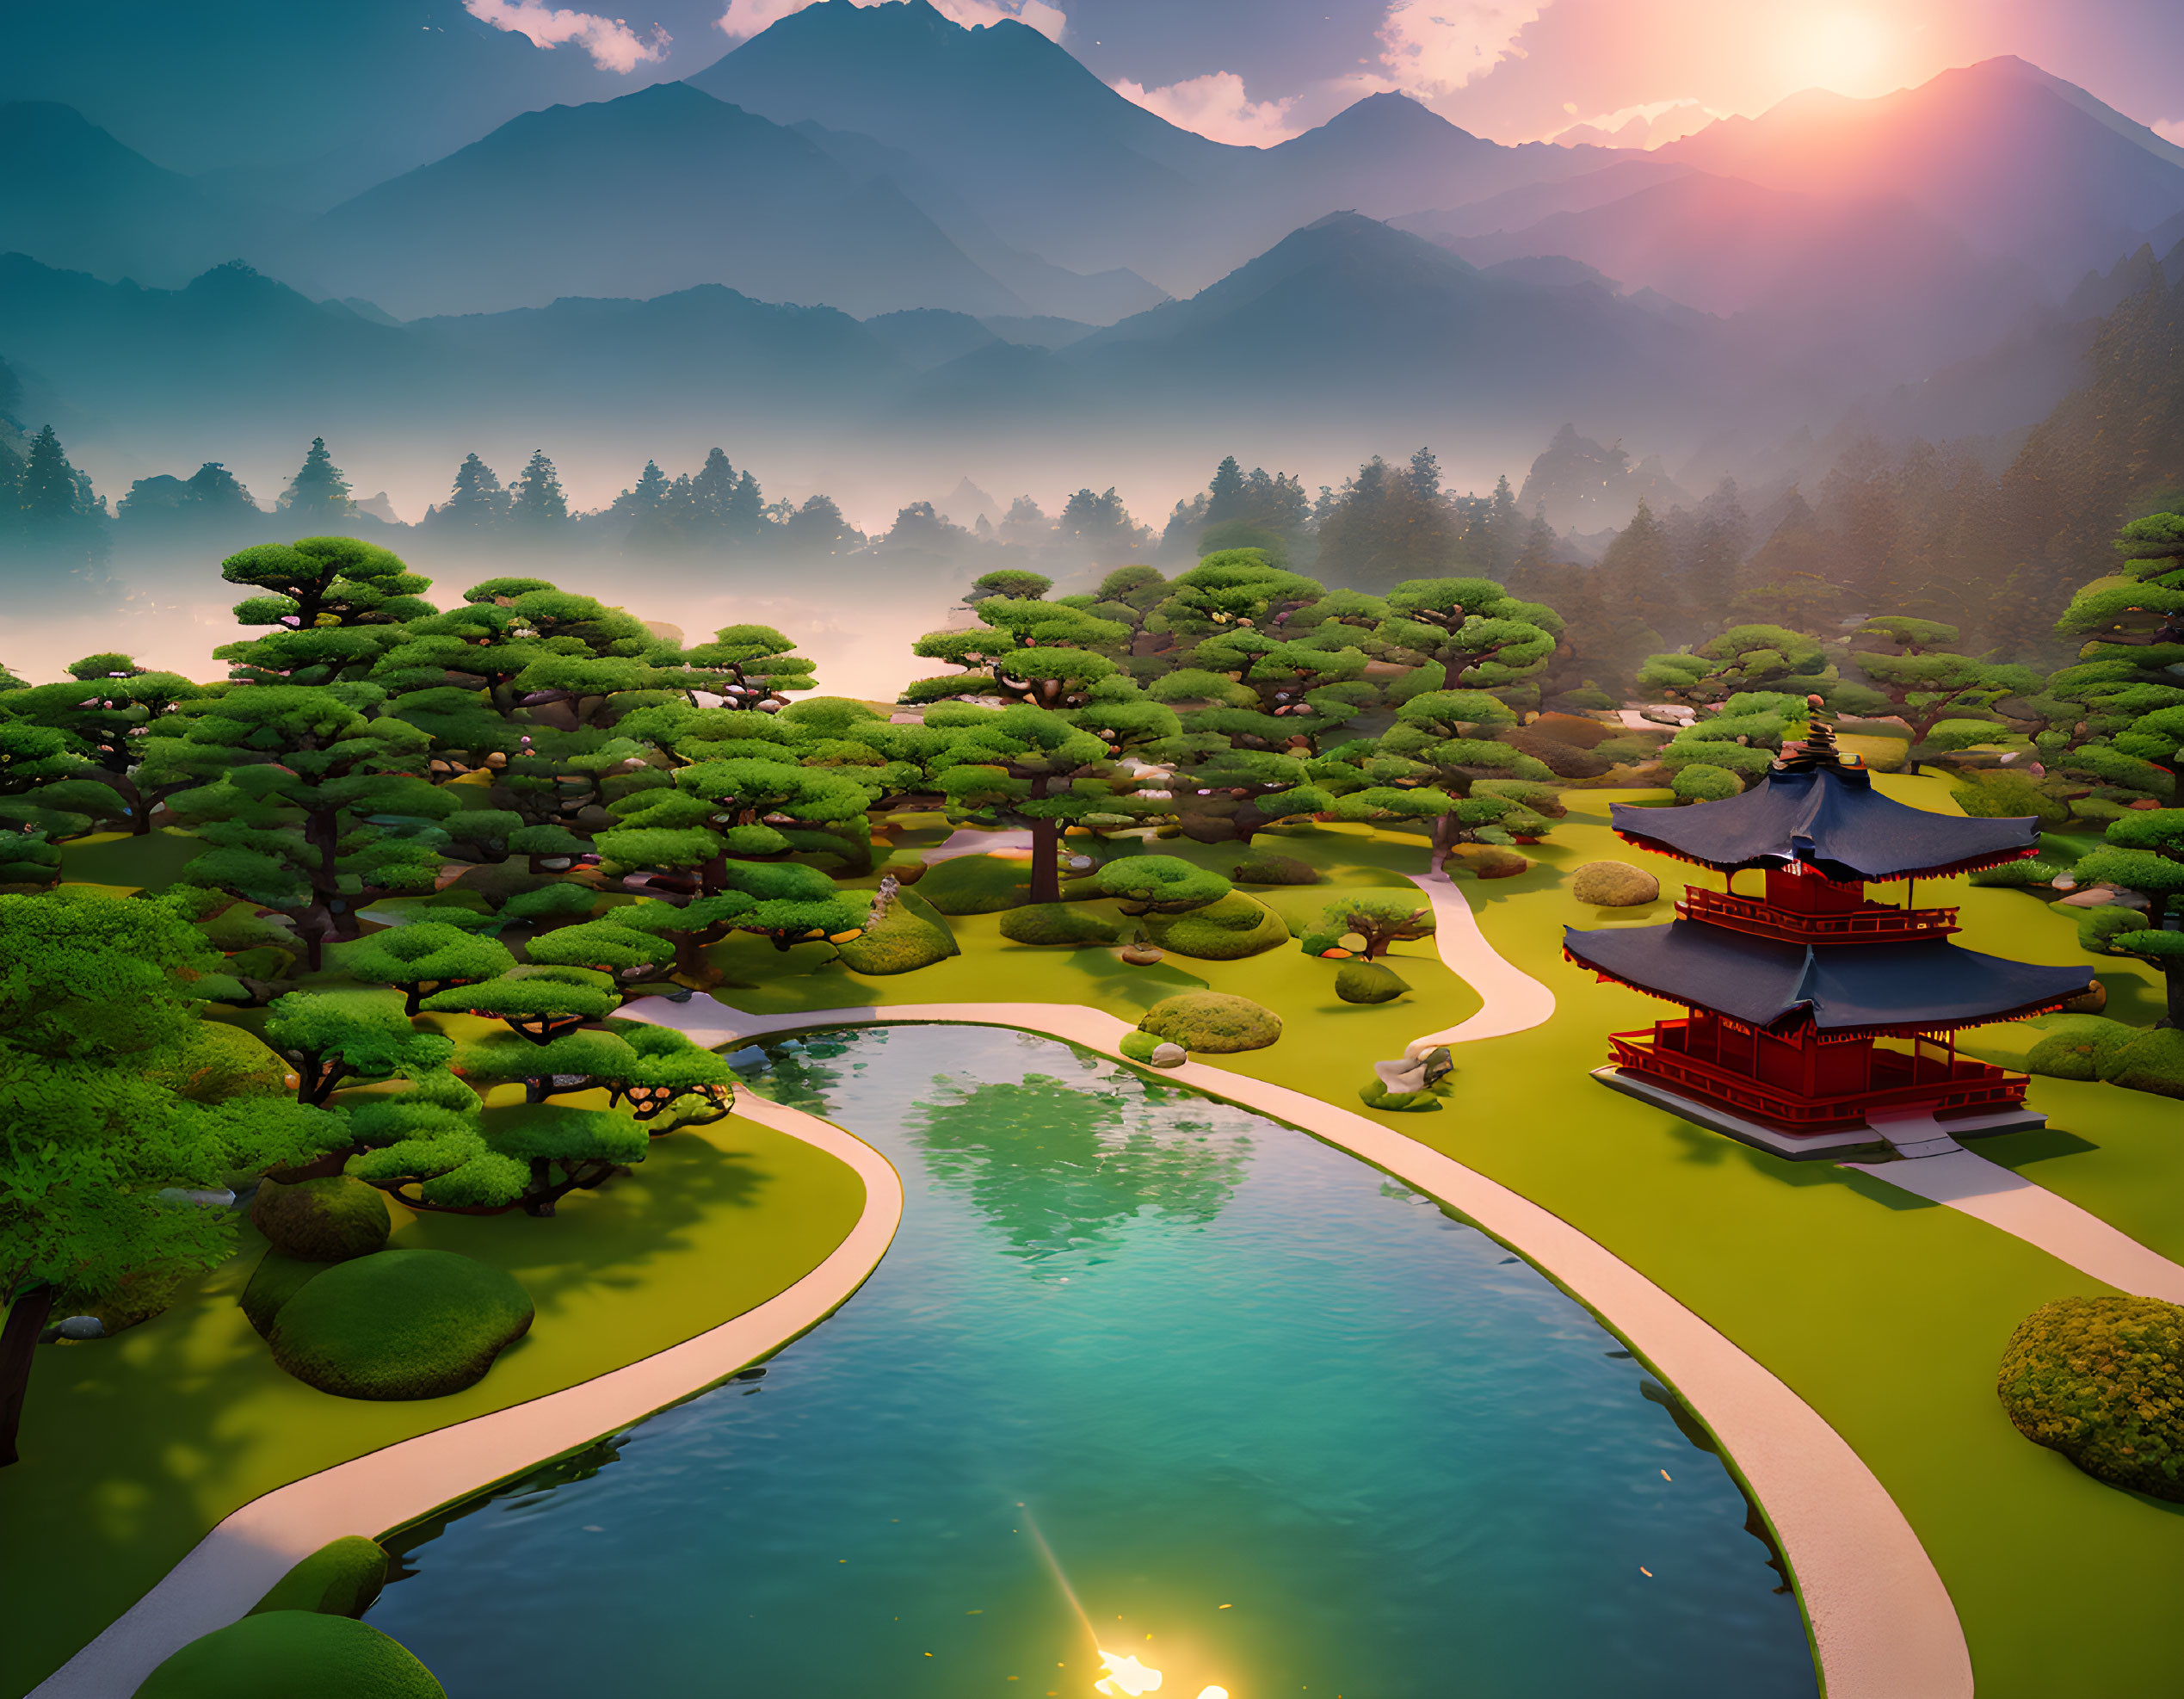 Tranquil Japanese garden with pond, bonsai trees, misty mountains, and red pagoda